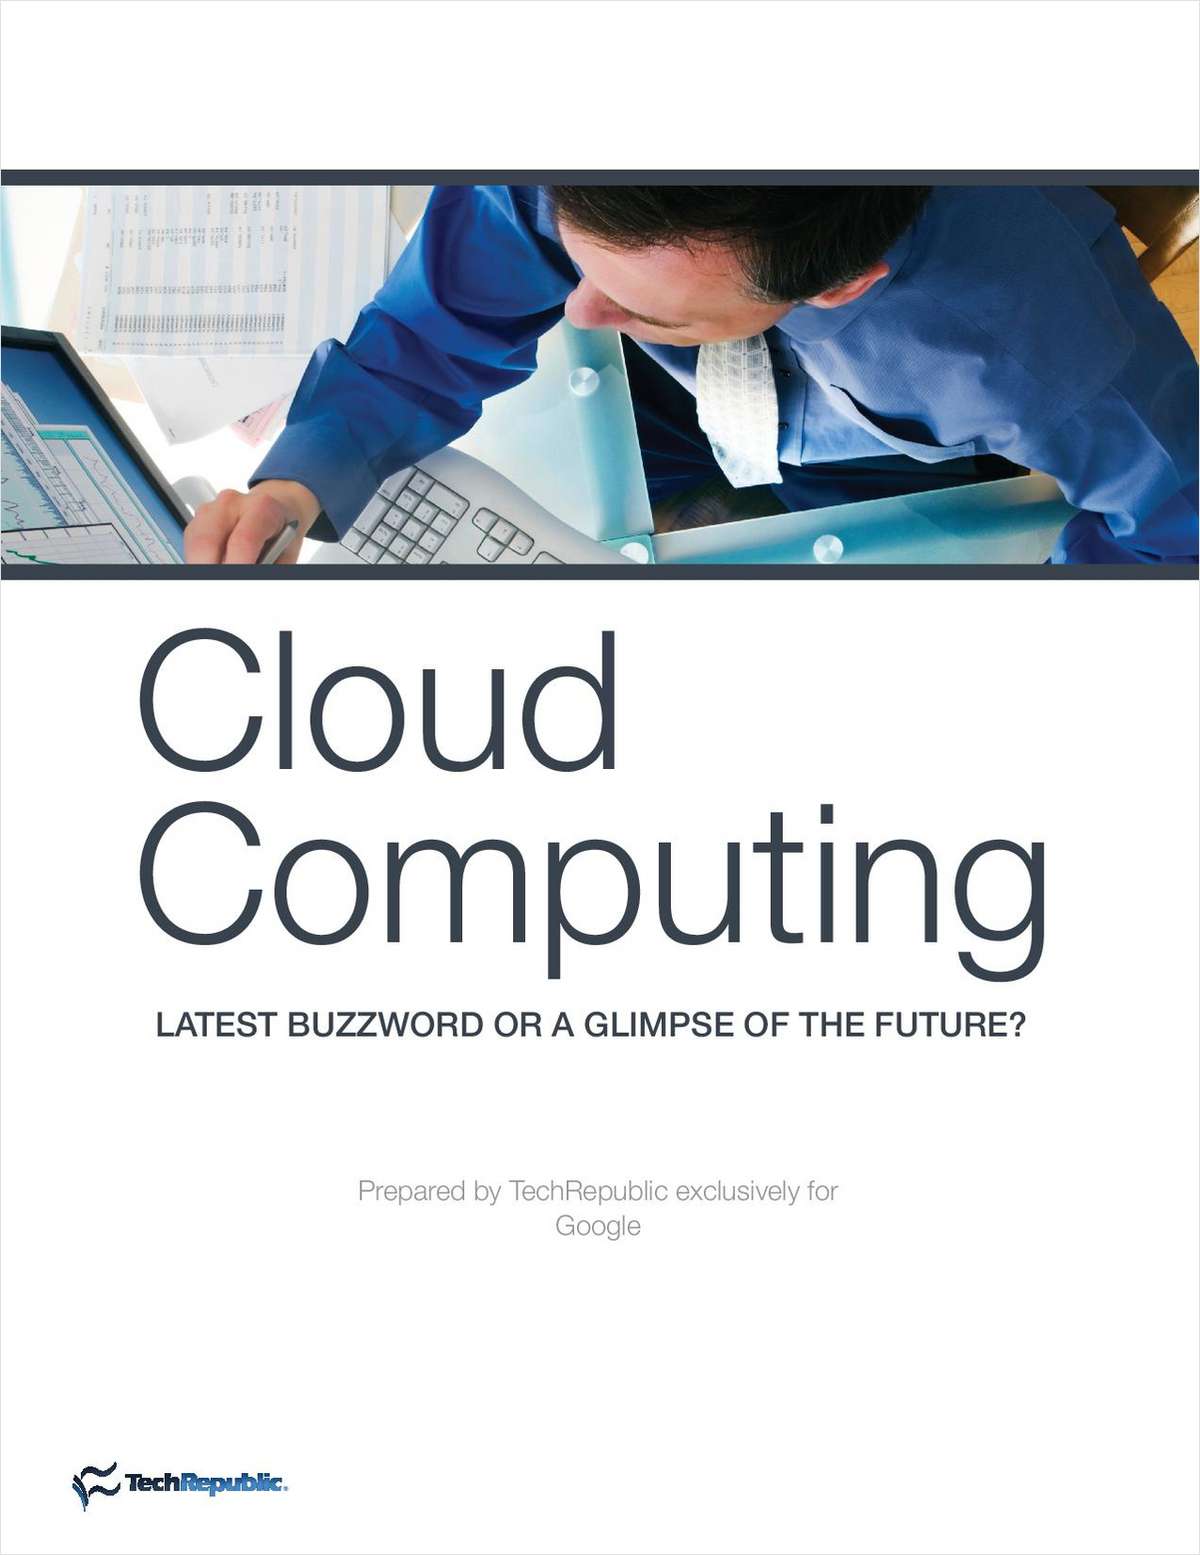 Cloud Computing - Latest Buzzword or a Glimpse of the Future?